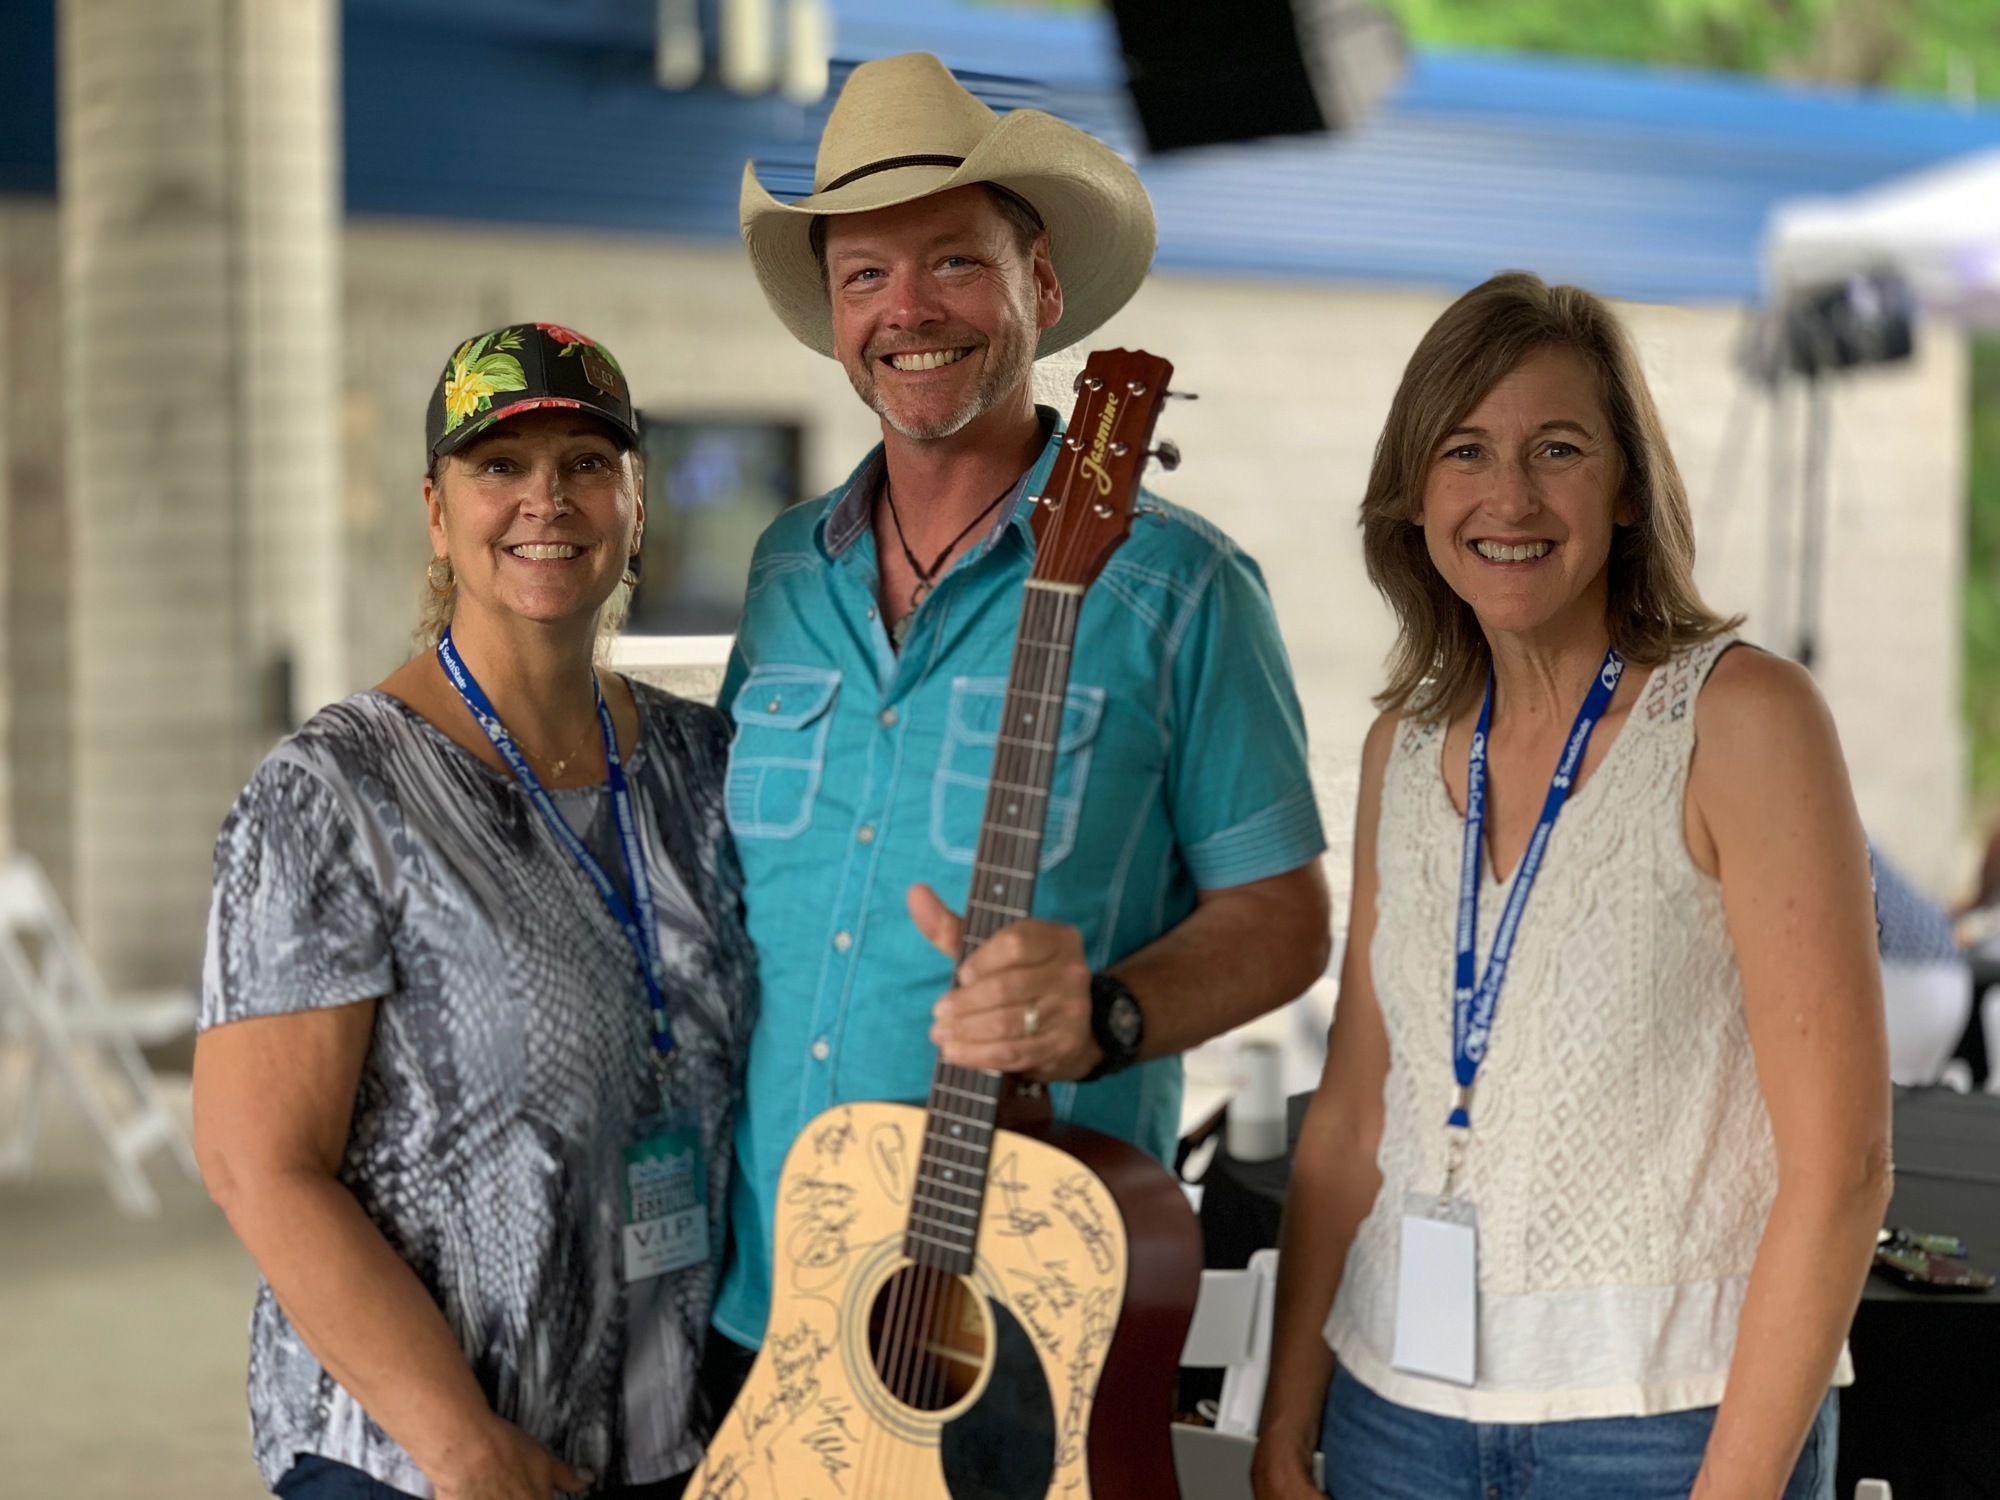 Elaine Bramlitt, of Bunnell, won the guitar raffled at the Palm Songwriters Festival. She is pictured here with songwriter Thom Shepherd and the Early Learning Coaliton's Nancy Walsh.  Courtesy photo